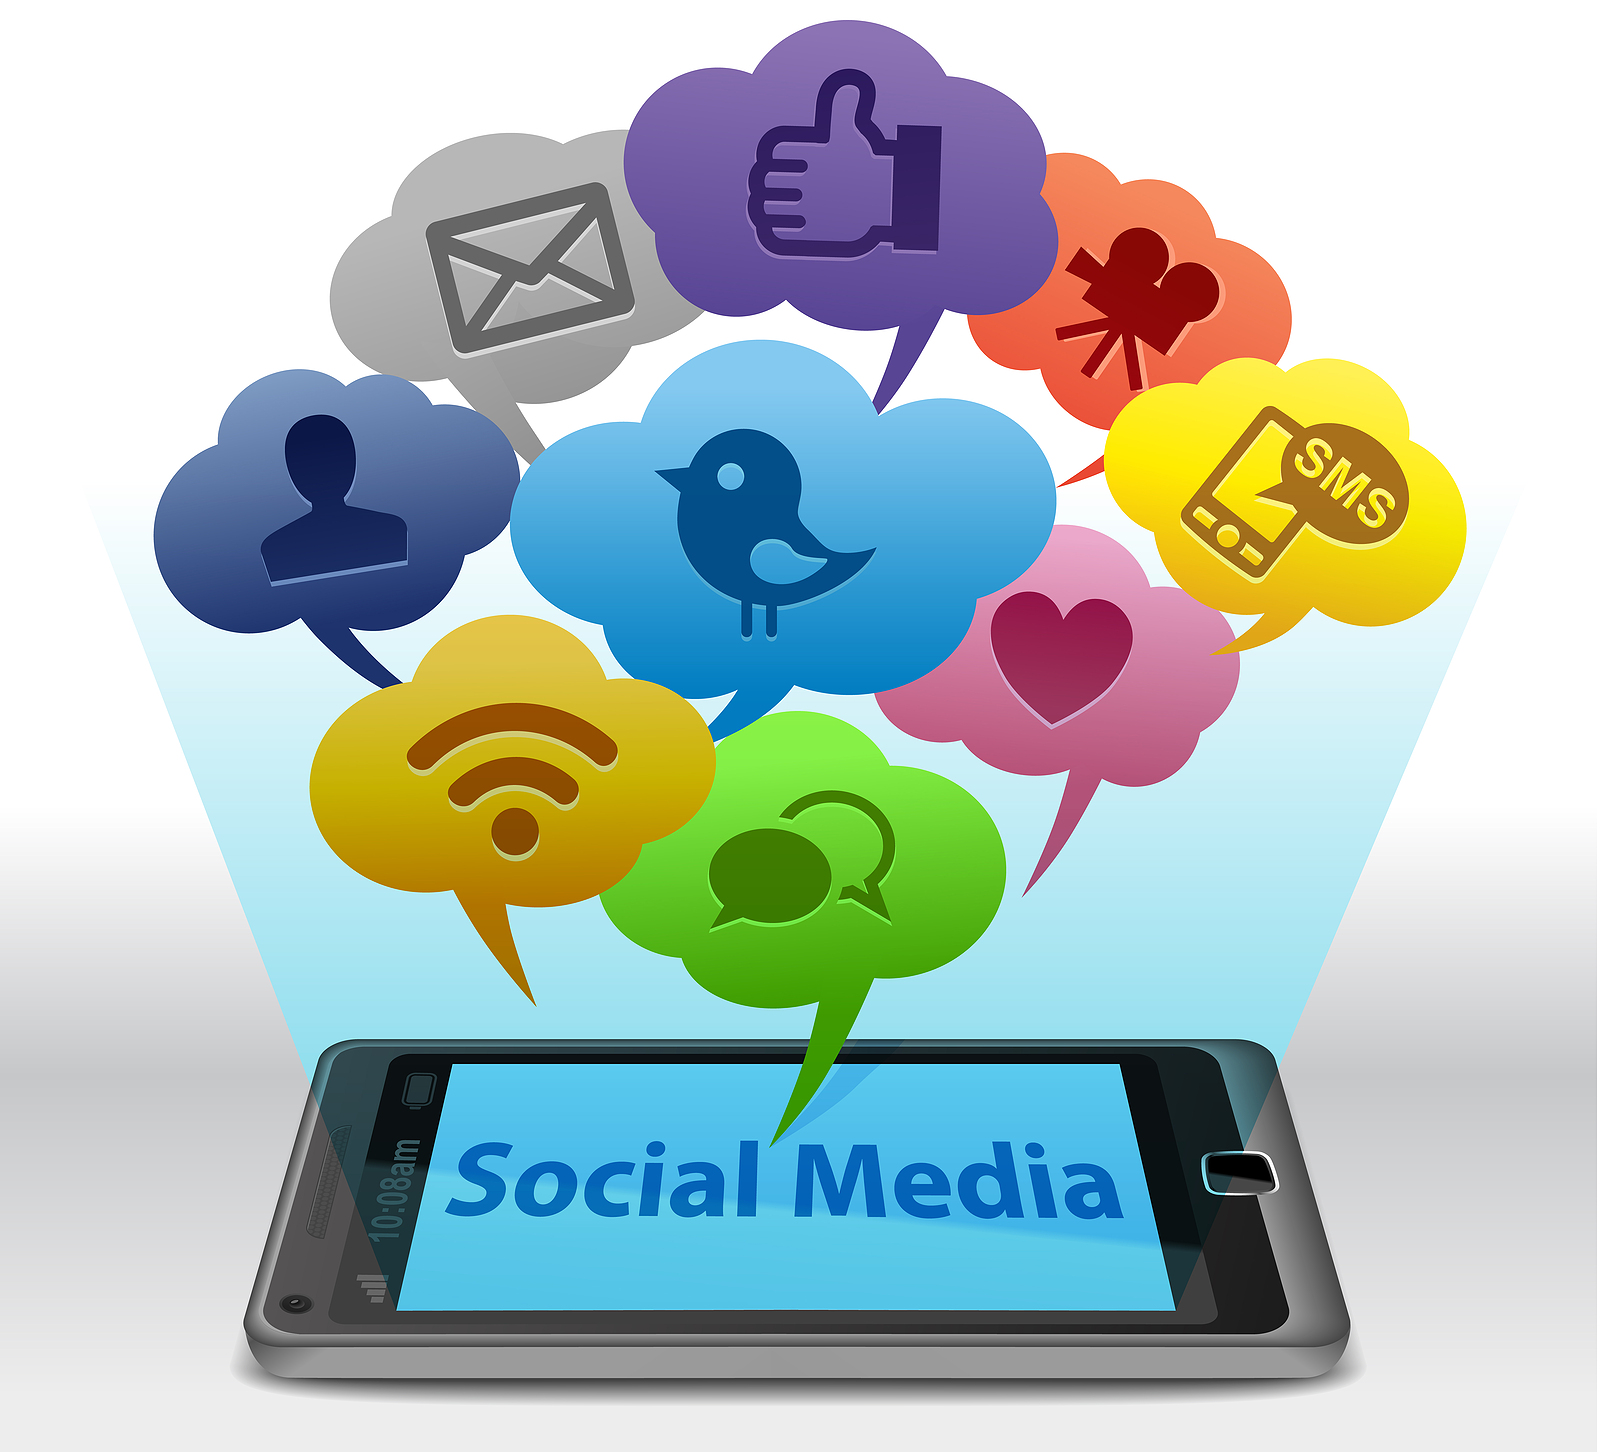 social media marketing icons - real estate client communication